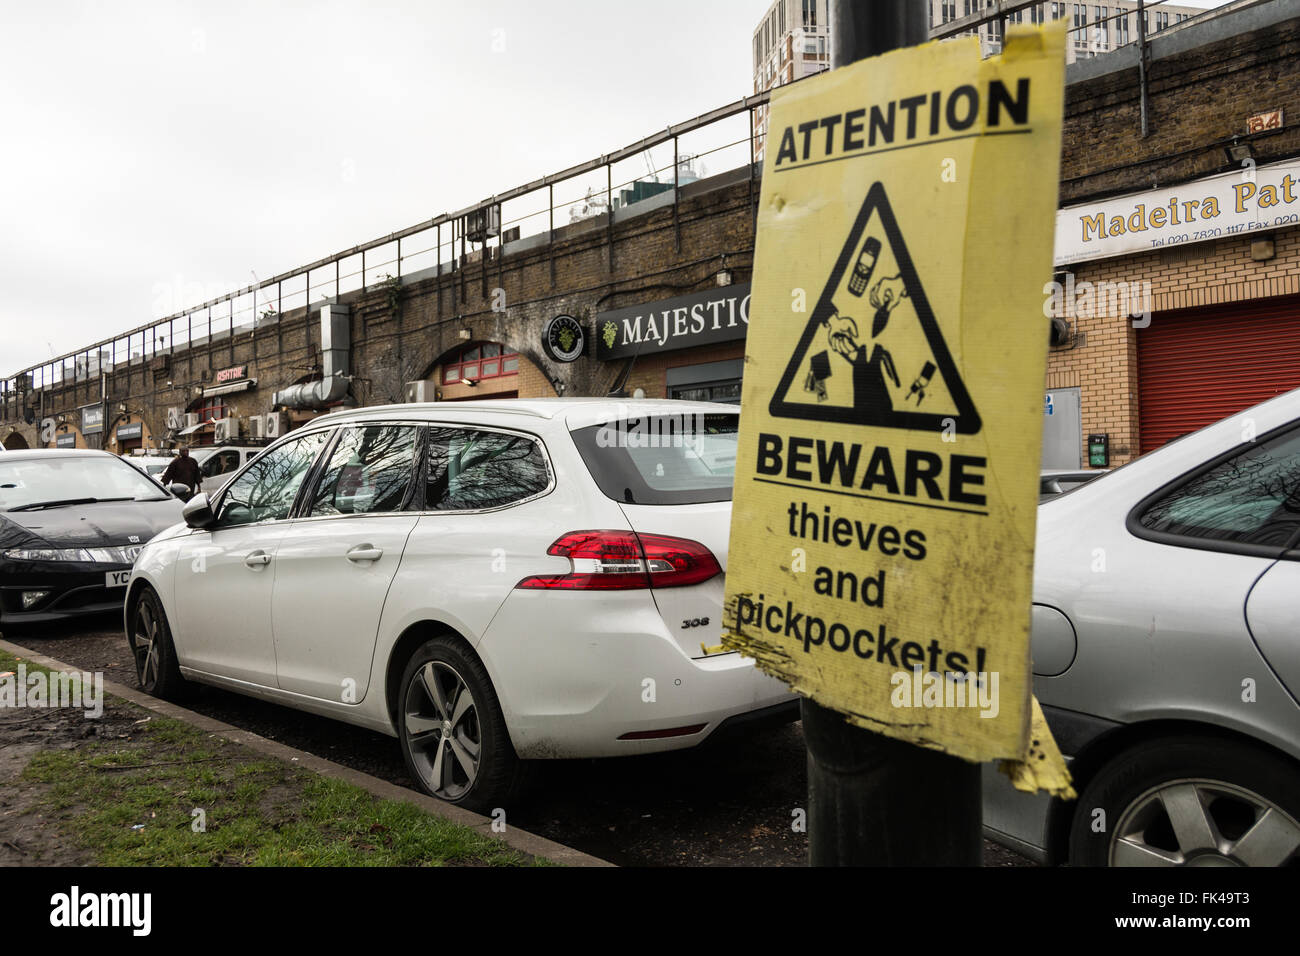 Beware - Thieves and Pickpockets sign in London street, UK. Stock Photo